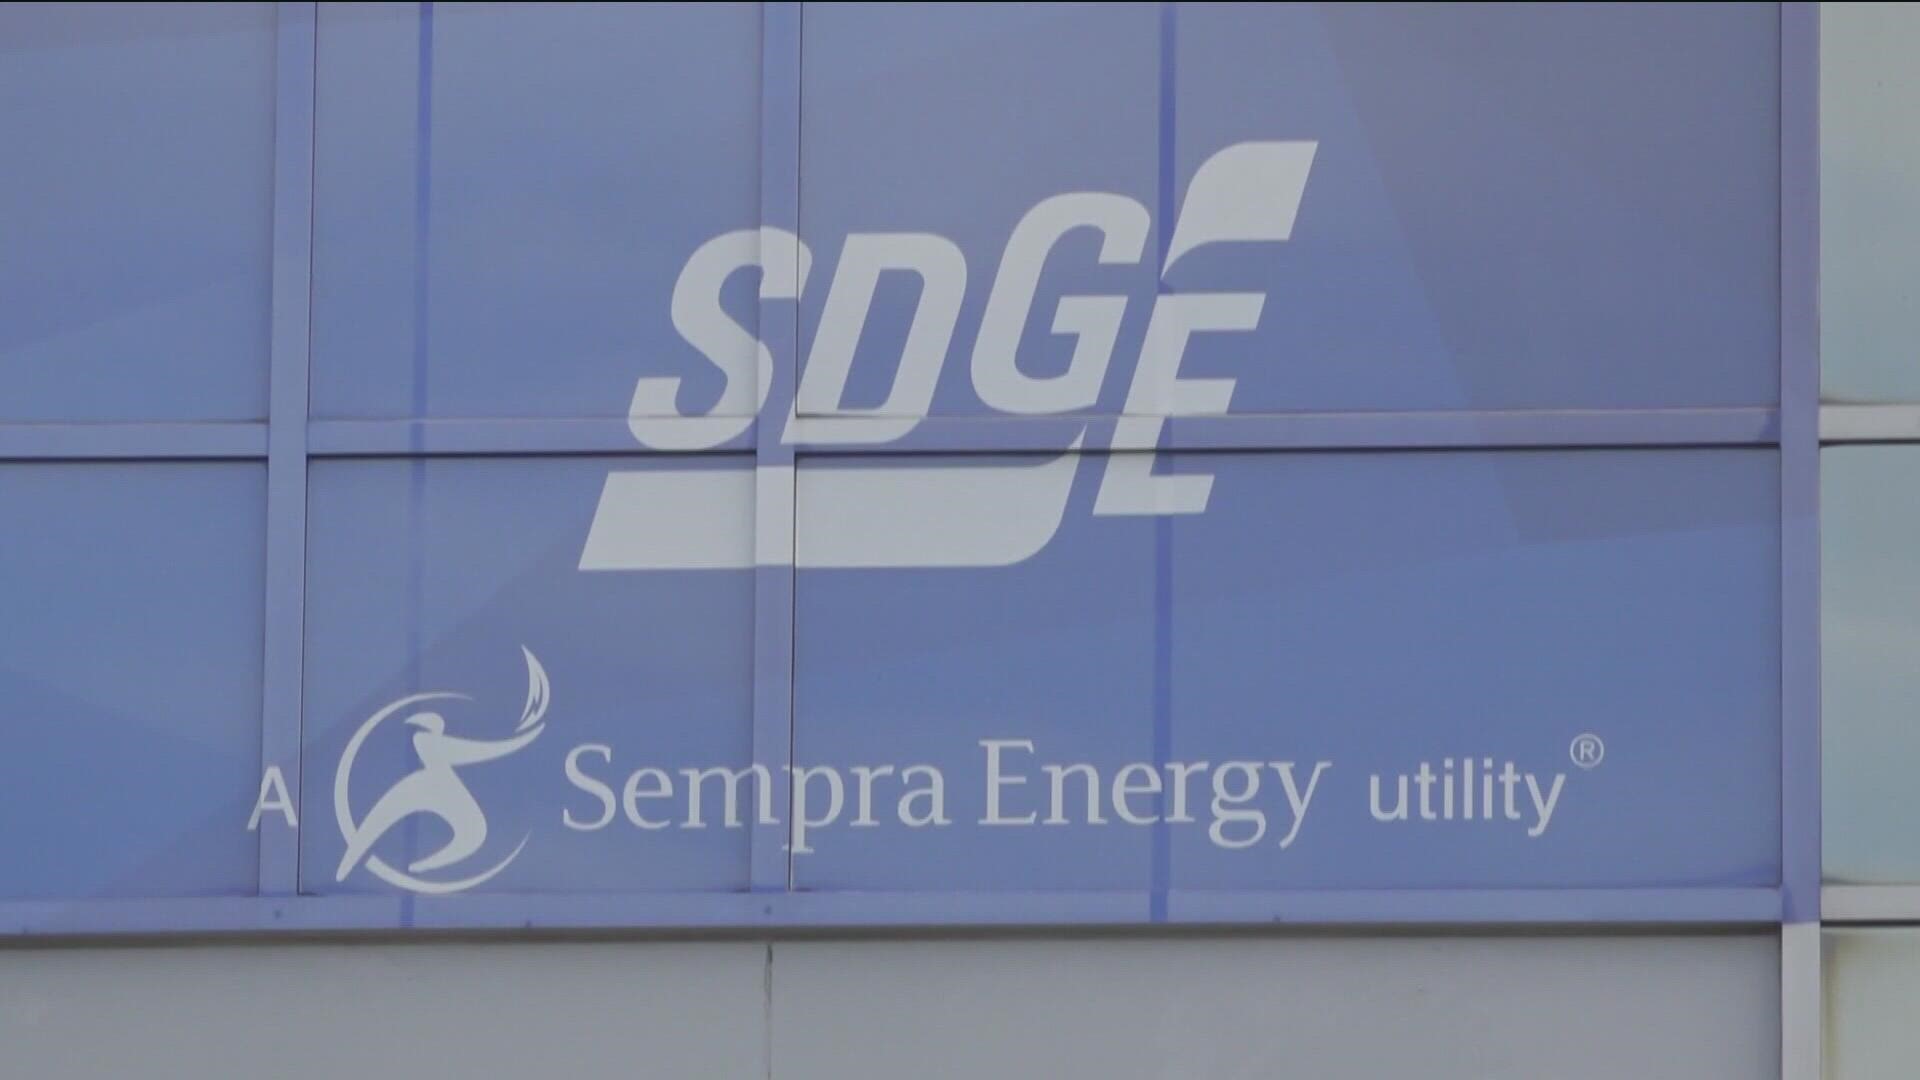 "If it keeps going up, I don't know what I'm gonna do," said SDG&E customer, Tammy Smith.